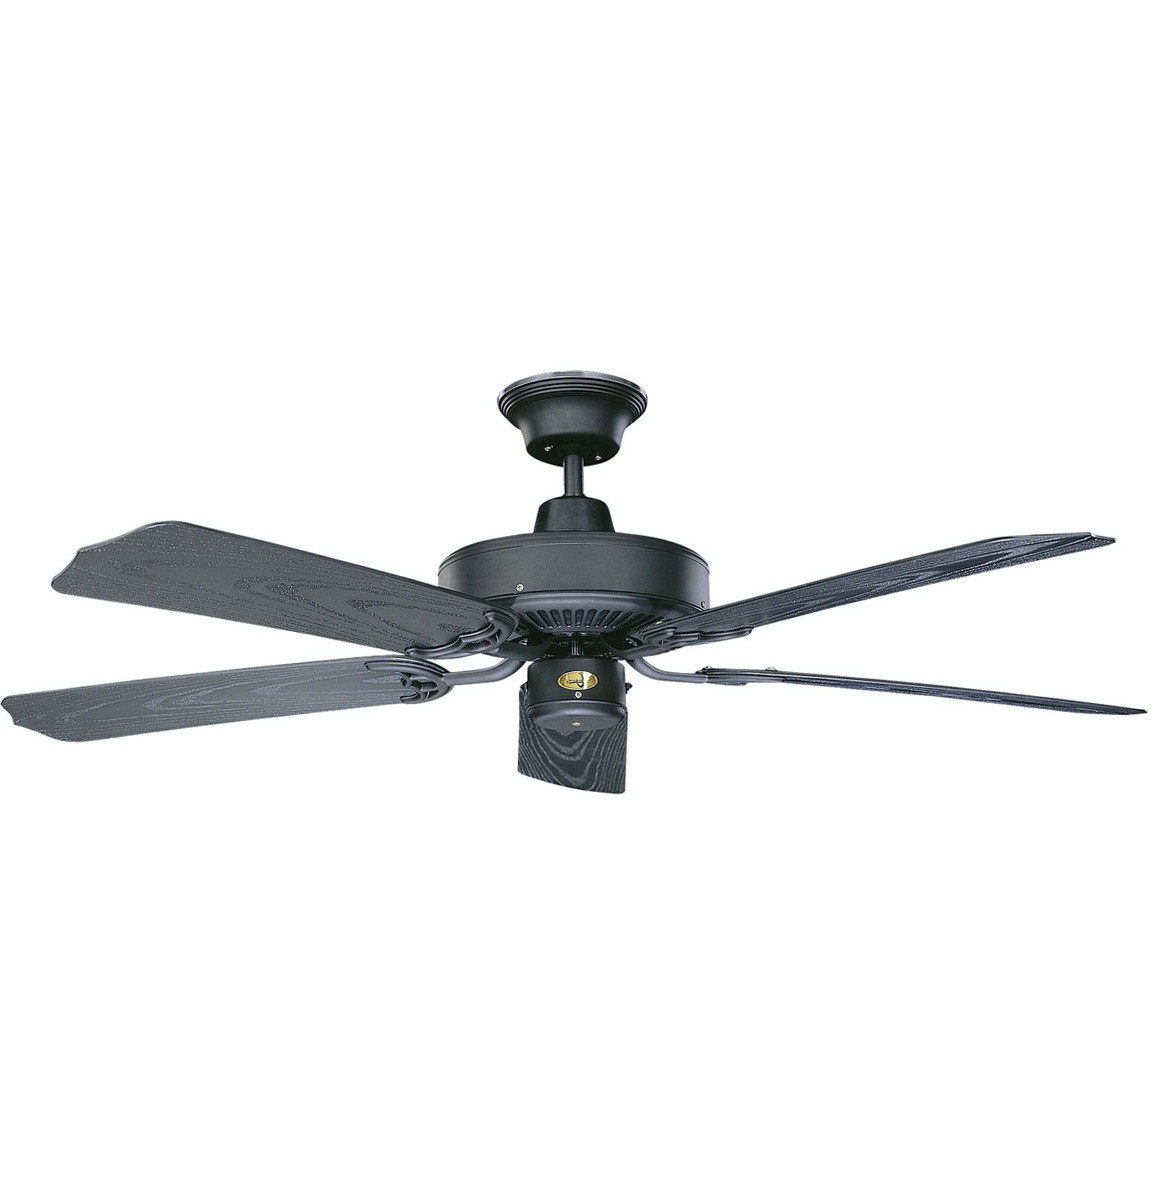 Small Fan For Kitchen
 Small kitchen ceiling fans